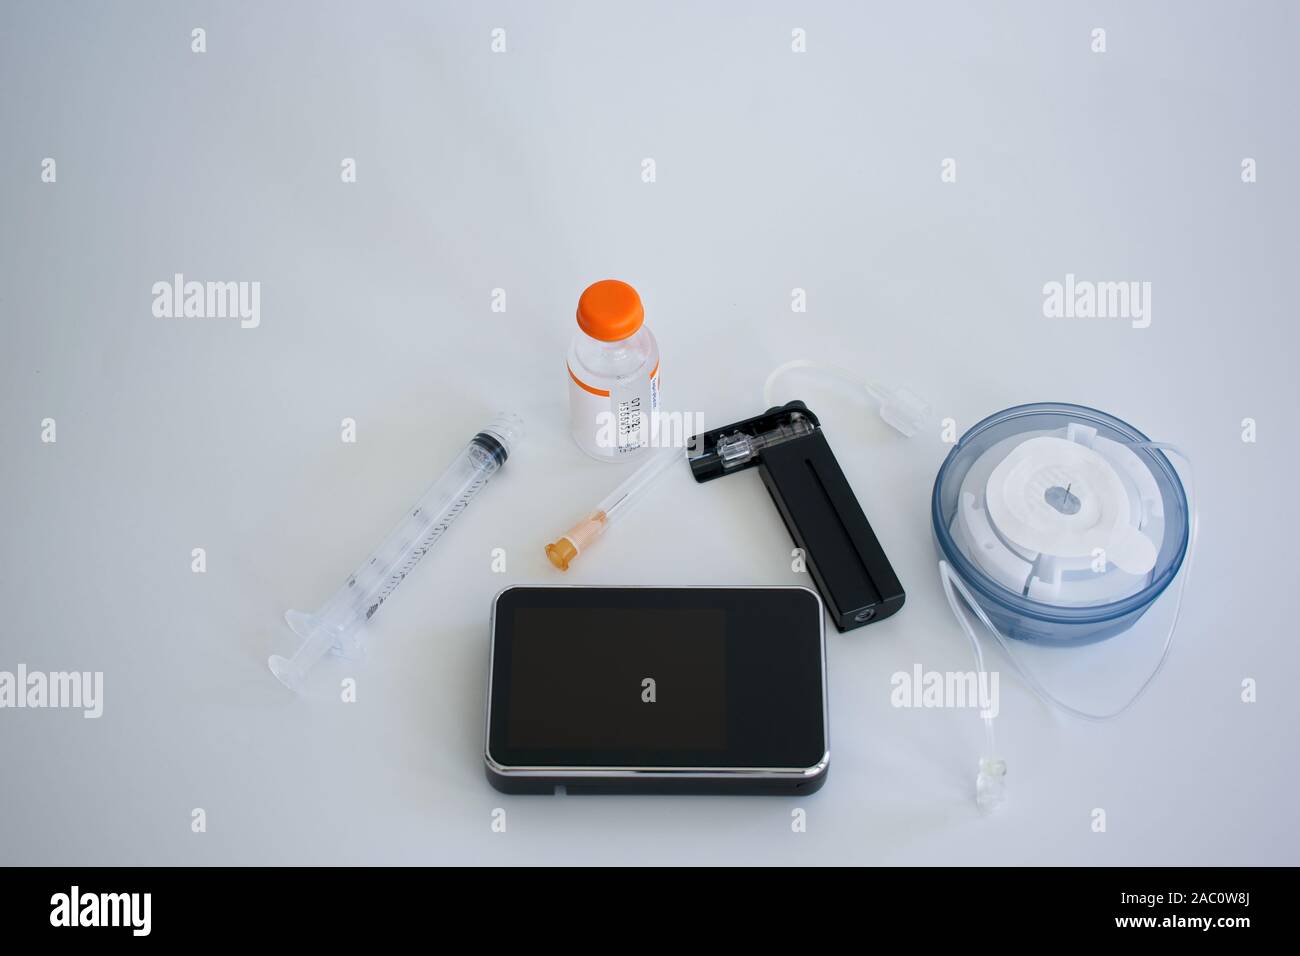 Insulin pump equipment includes infusion set, cartridge and insulin vial. Stock Photo